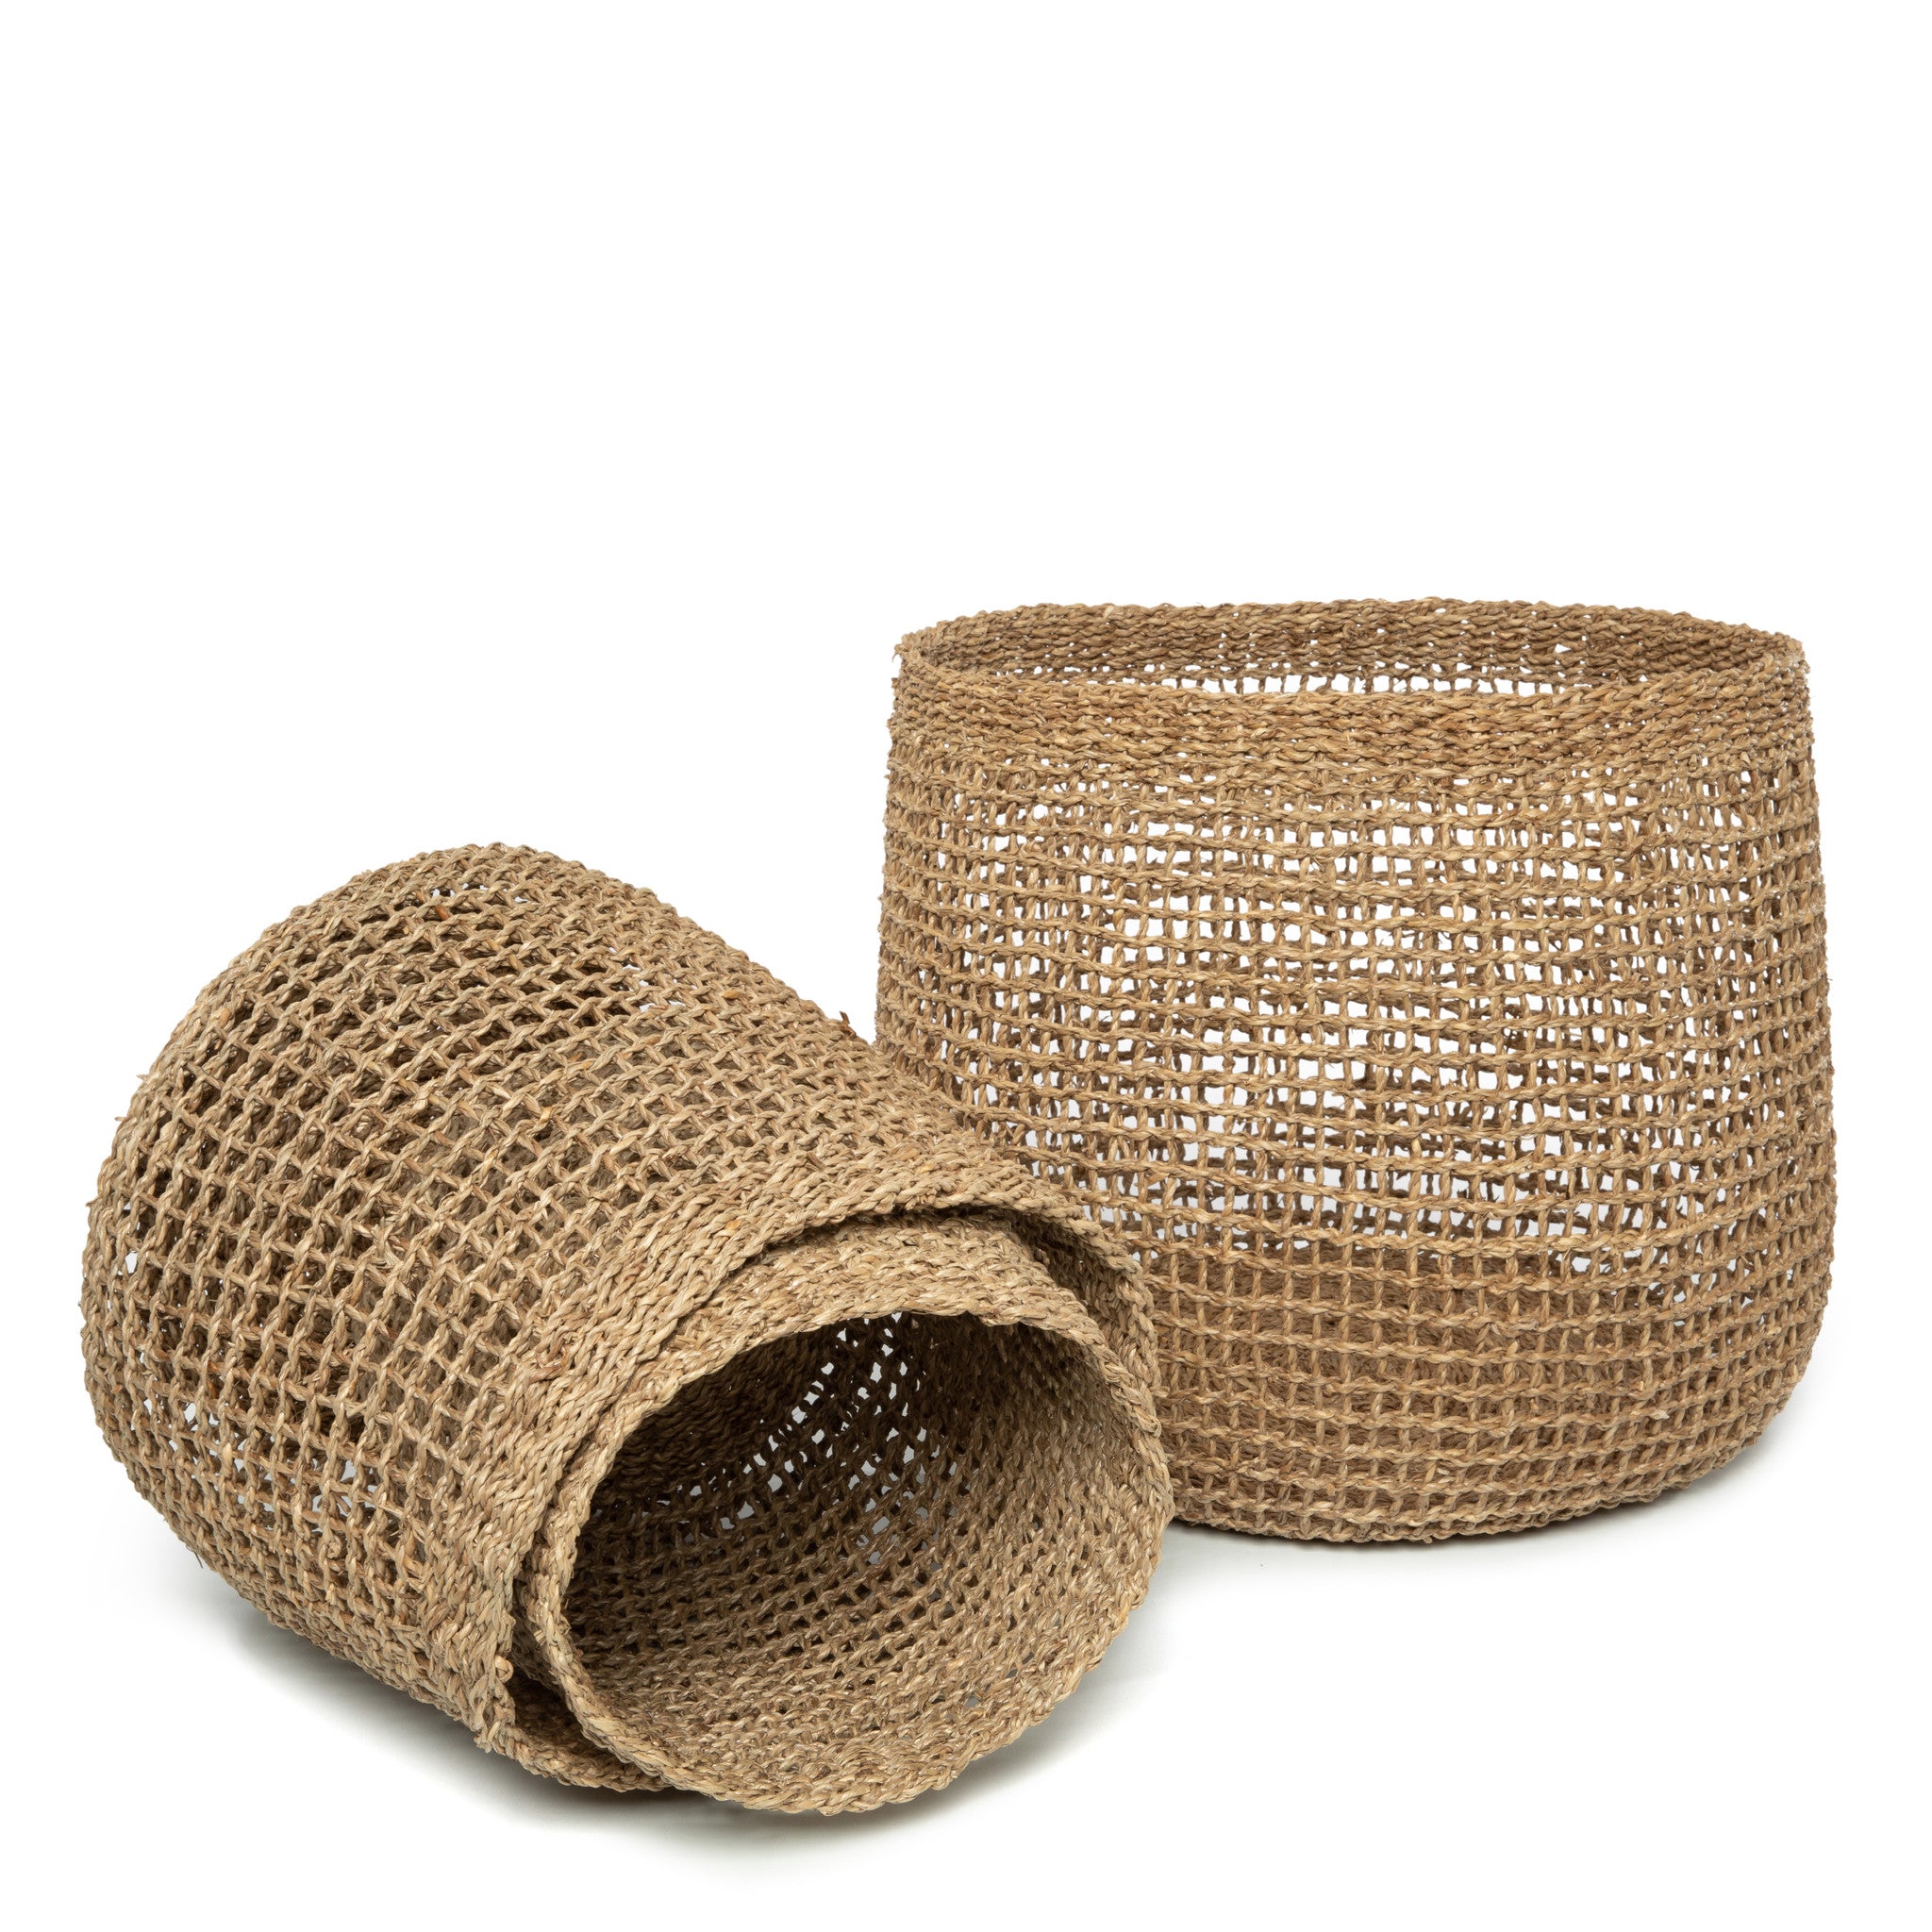 THE LANG CO Baskets Set of 3 half-folded front view